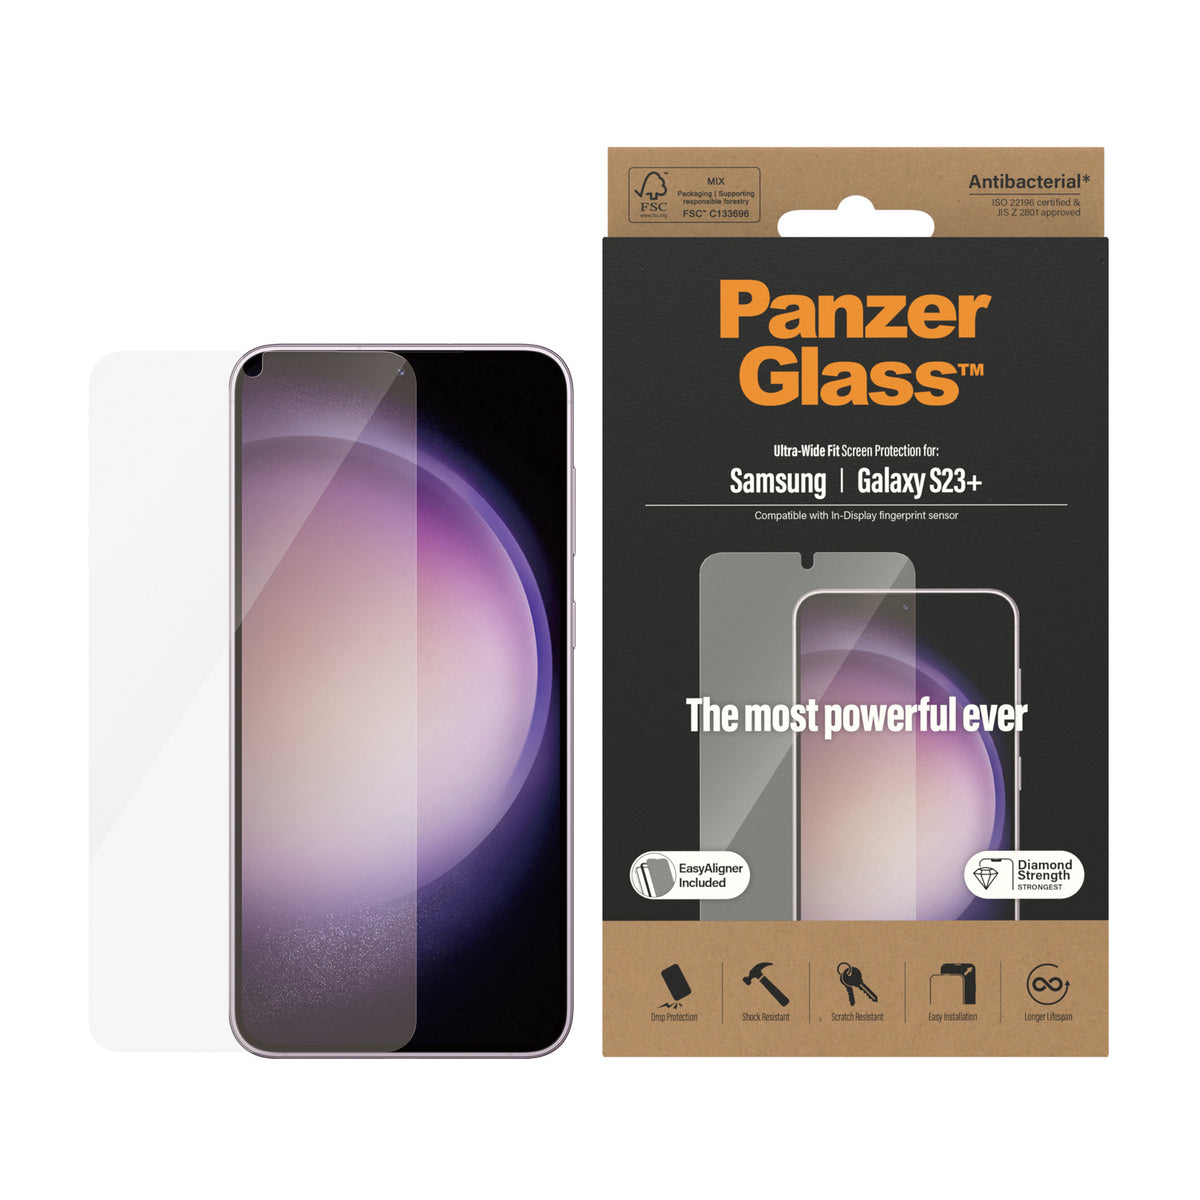 PANZERGLASS Ultra Wide Fit Screen Protector for Samsung Galaxy S23 Plus - Clear with Black Frame